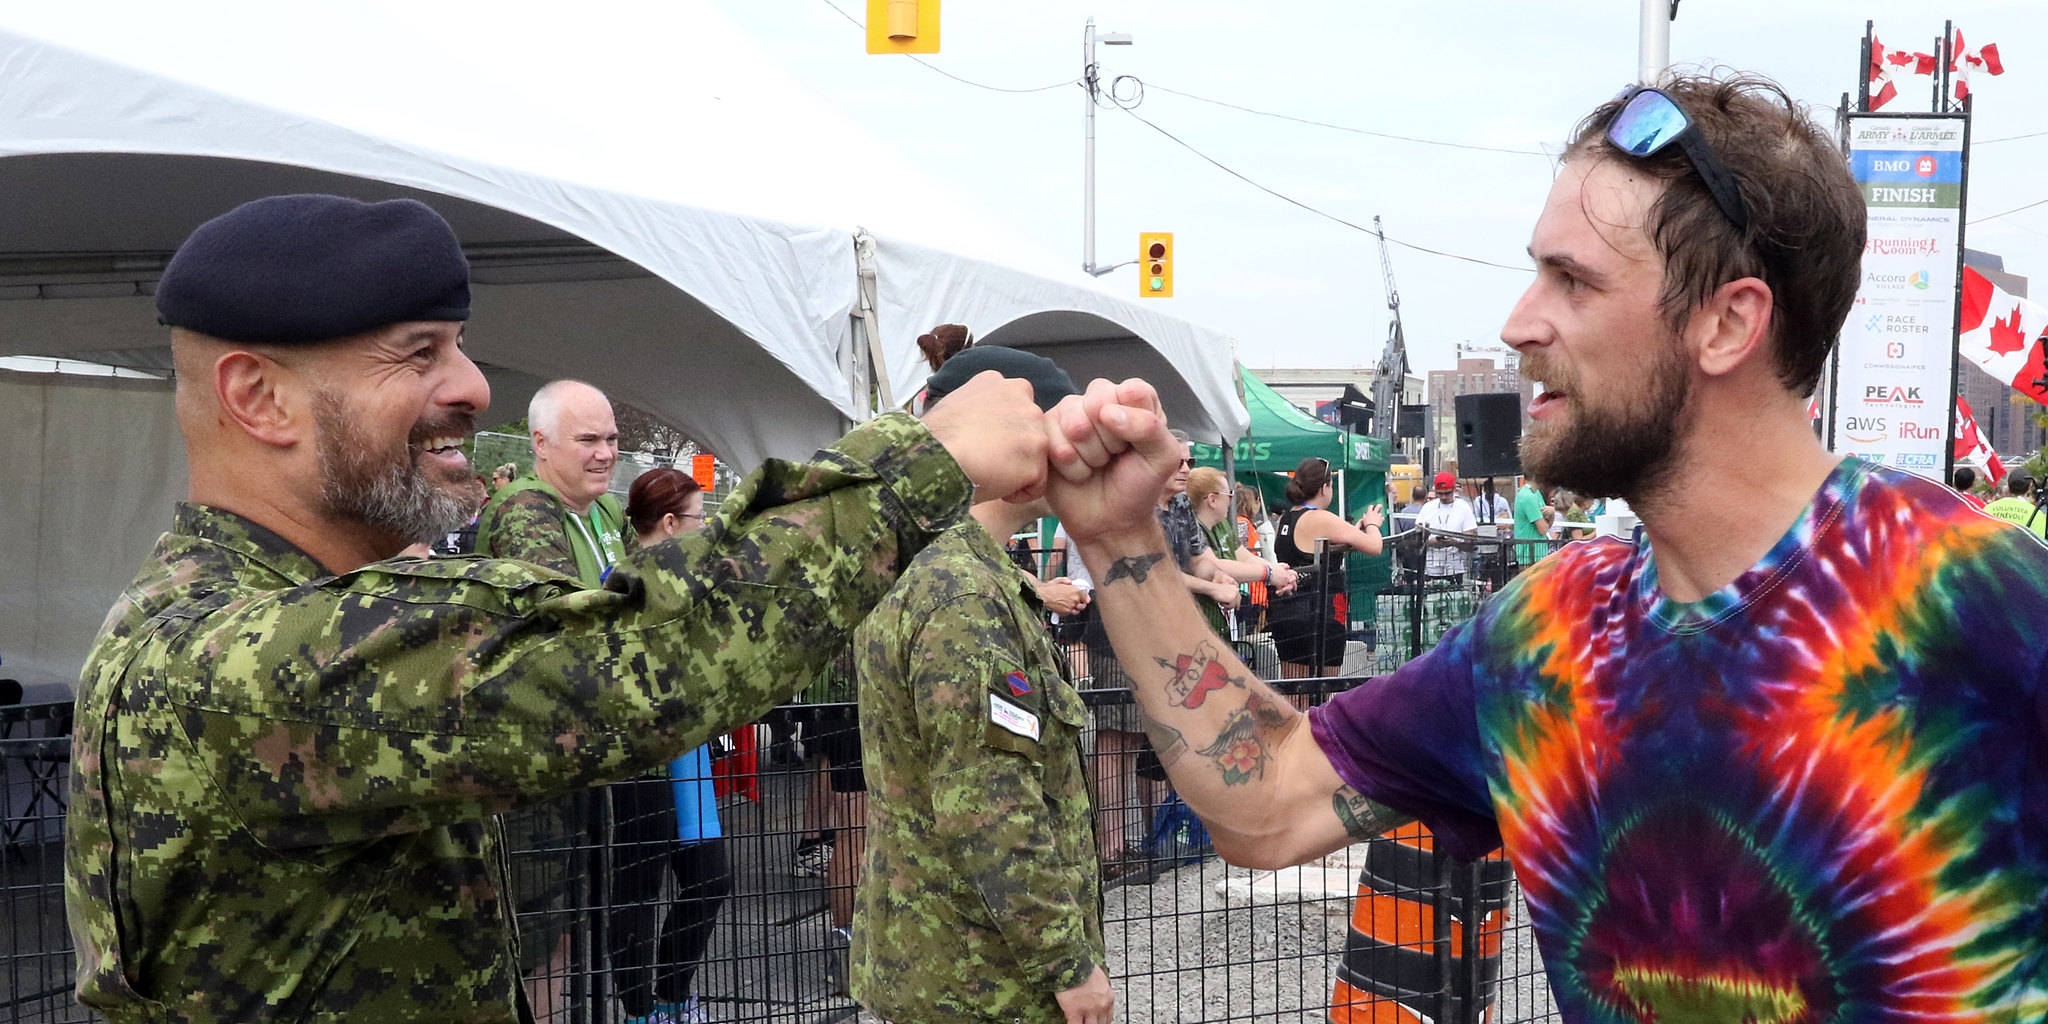 2019 Race director giving fits bump to 2019 canada army run partiicpant